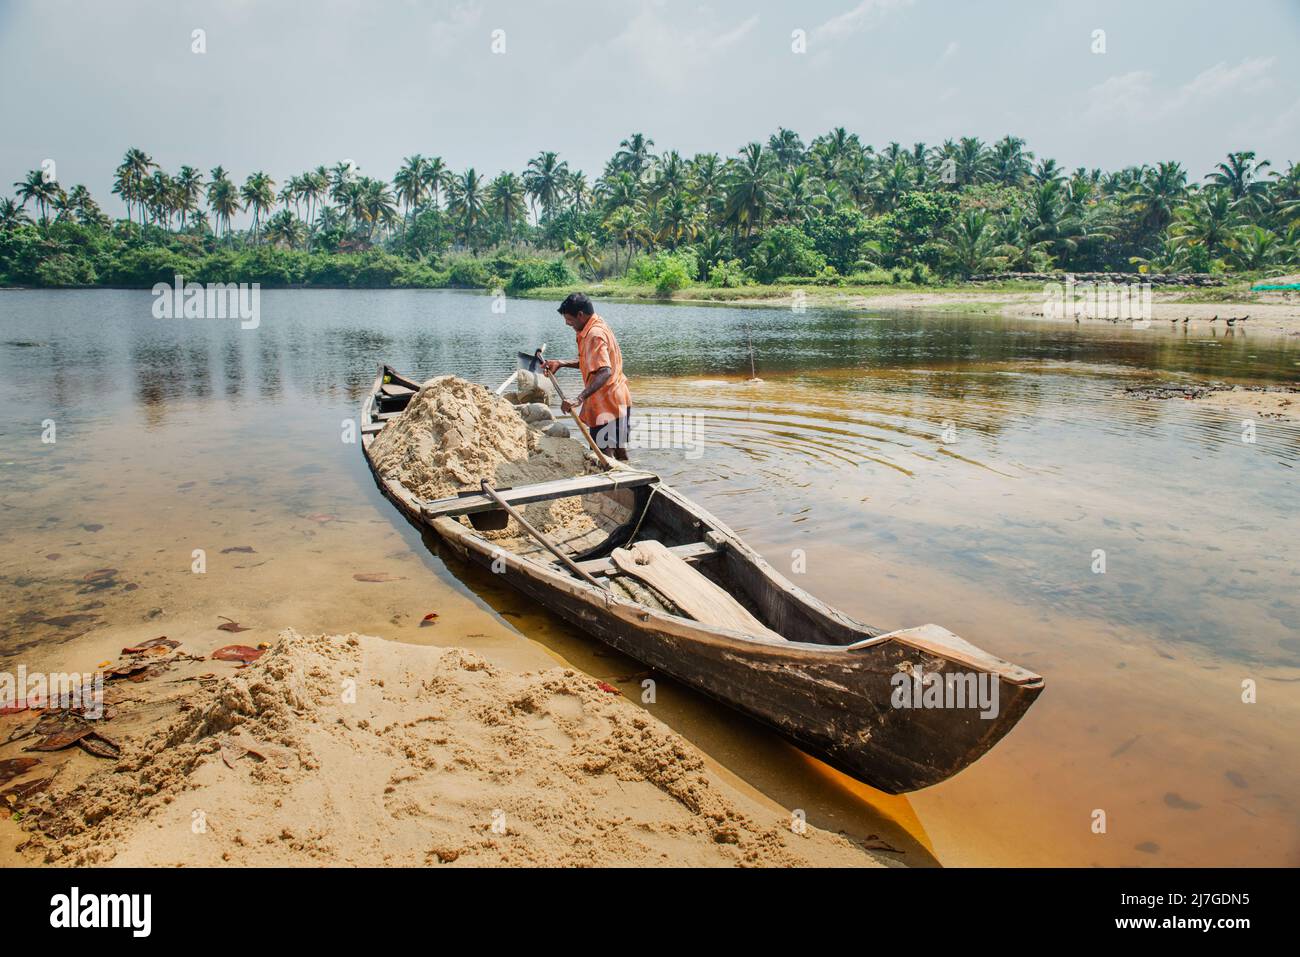 Alleppey, India - February 01, 2016: Indian man doing handwork on the backwaters. Example of hard manual labor in Asia Stock Photo